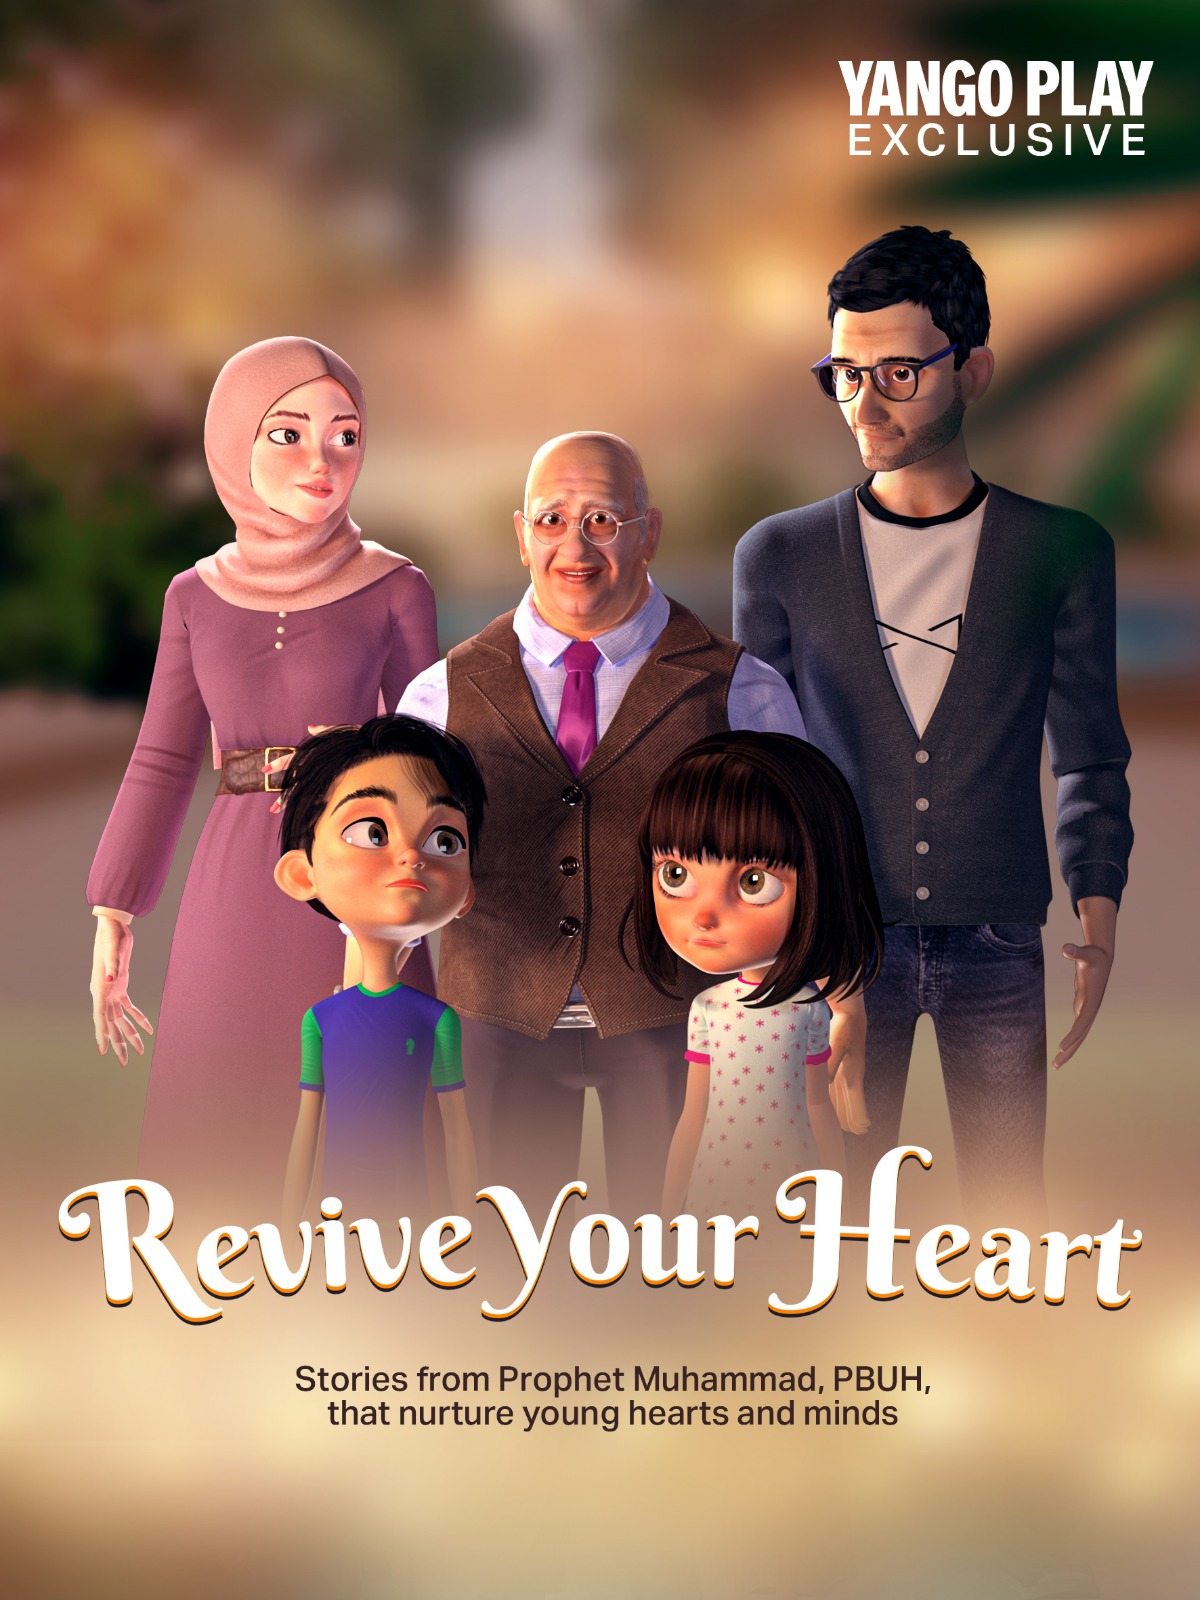 Image for Yango Play Unveils Exclusive Ramadan Content Lineup